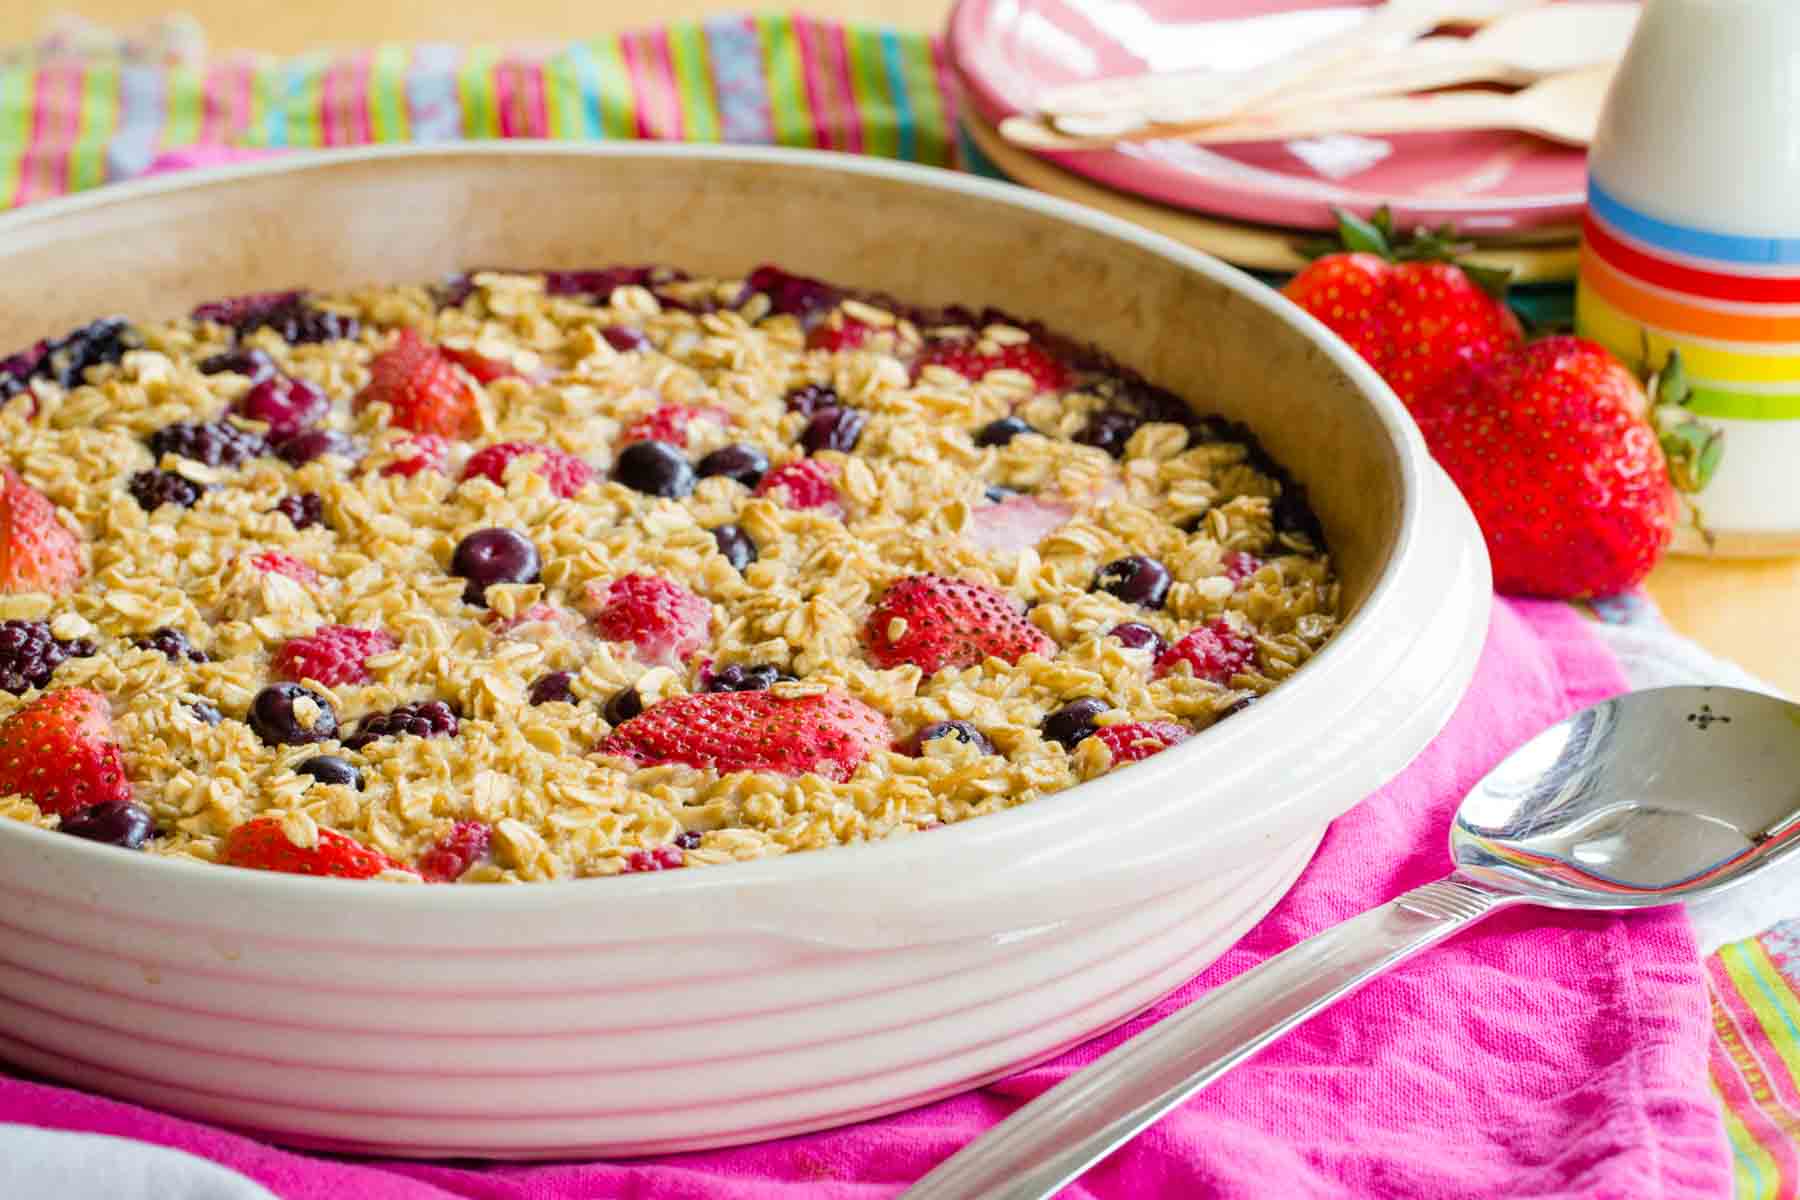 Round baking dish with Mixed Berry Baked Oatmeal on colorful cloth napkins with a stack of plates and a small bottle of milk in the background.